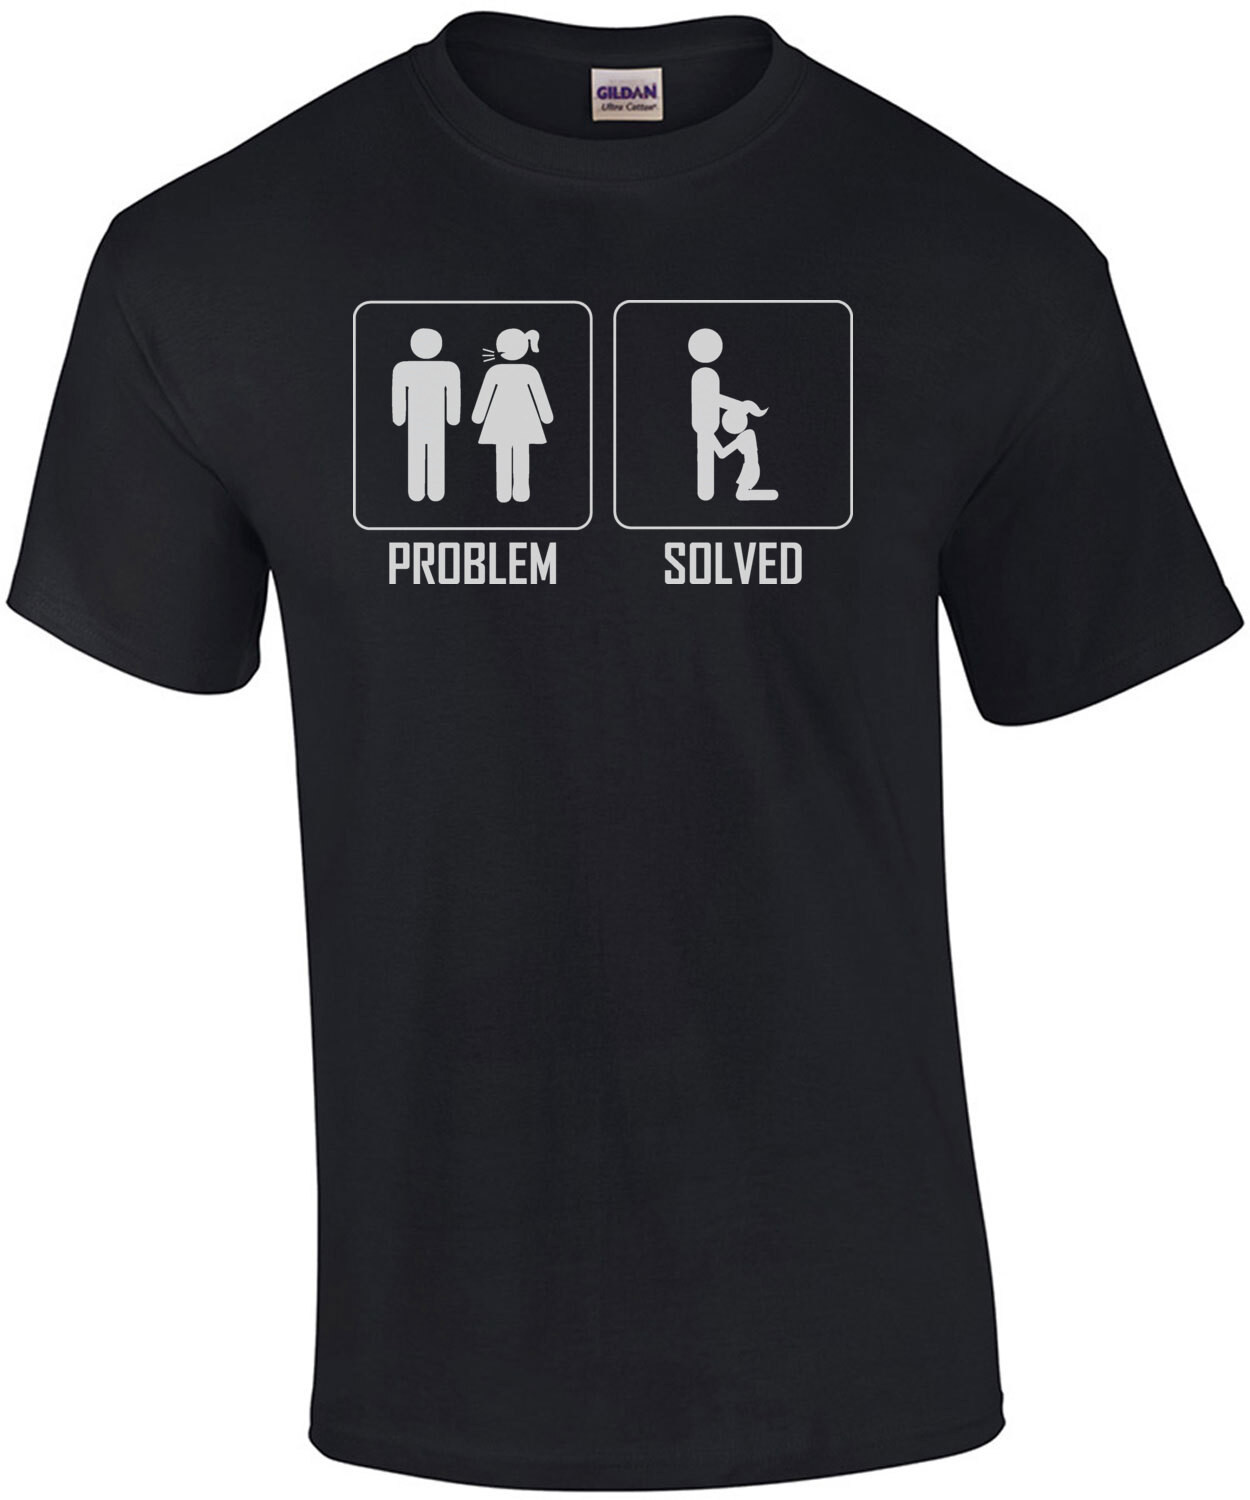 Problem Solved - Offensive Sexual T-Shirt